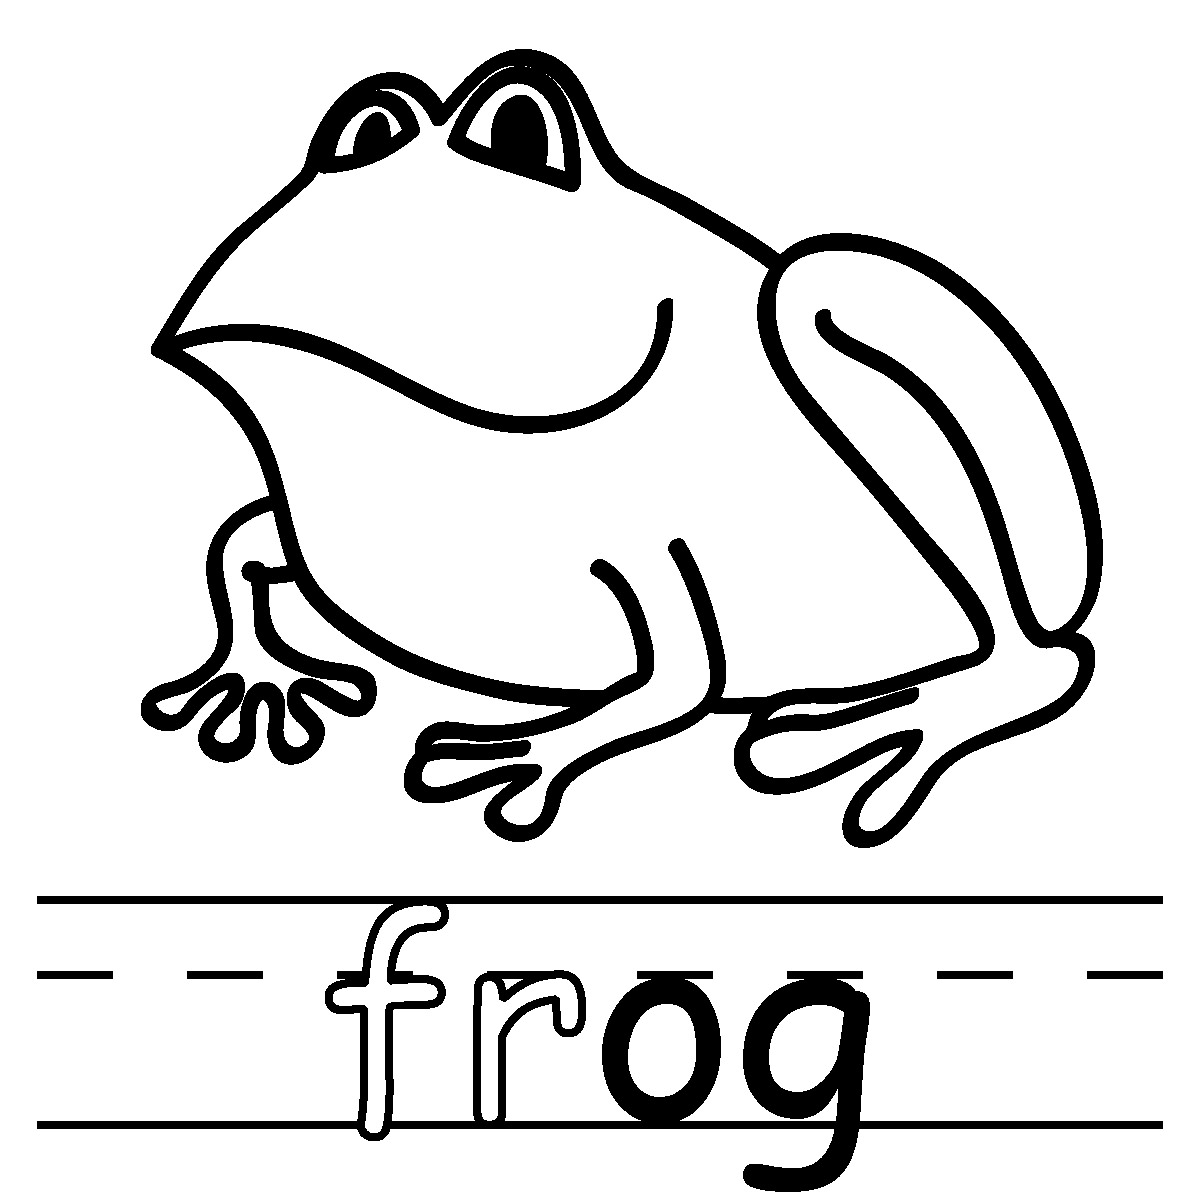 Tree Frog Black And White Hd Image Clipart